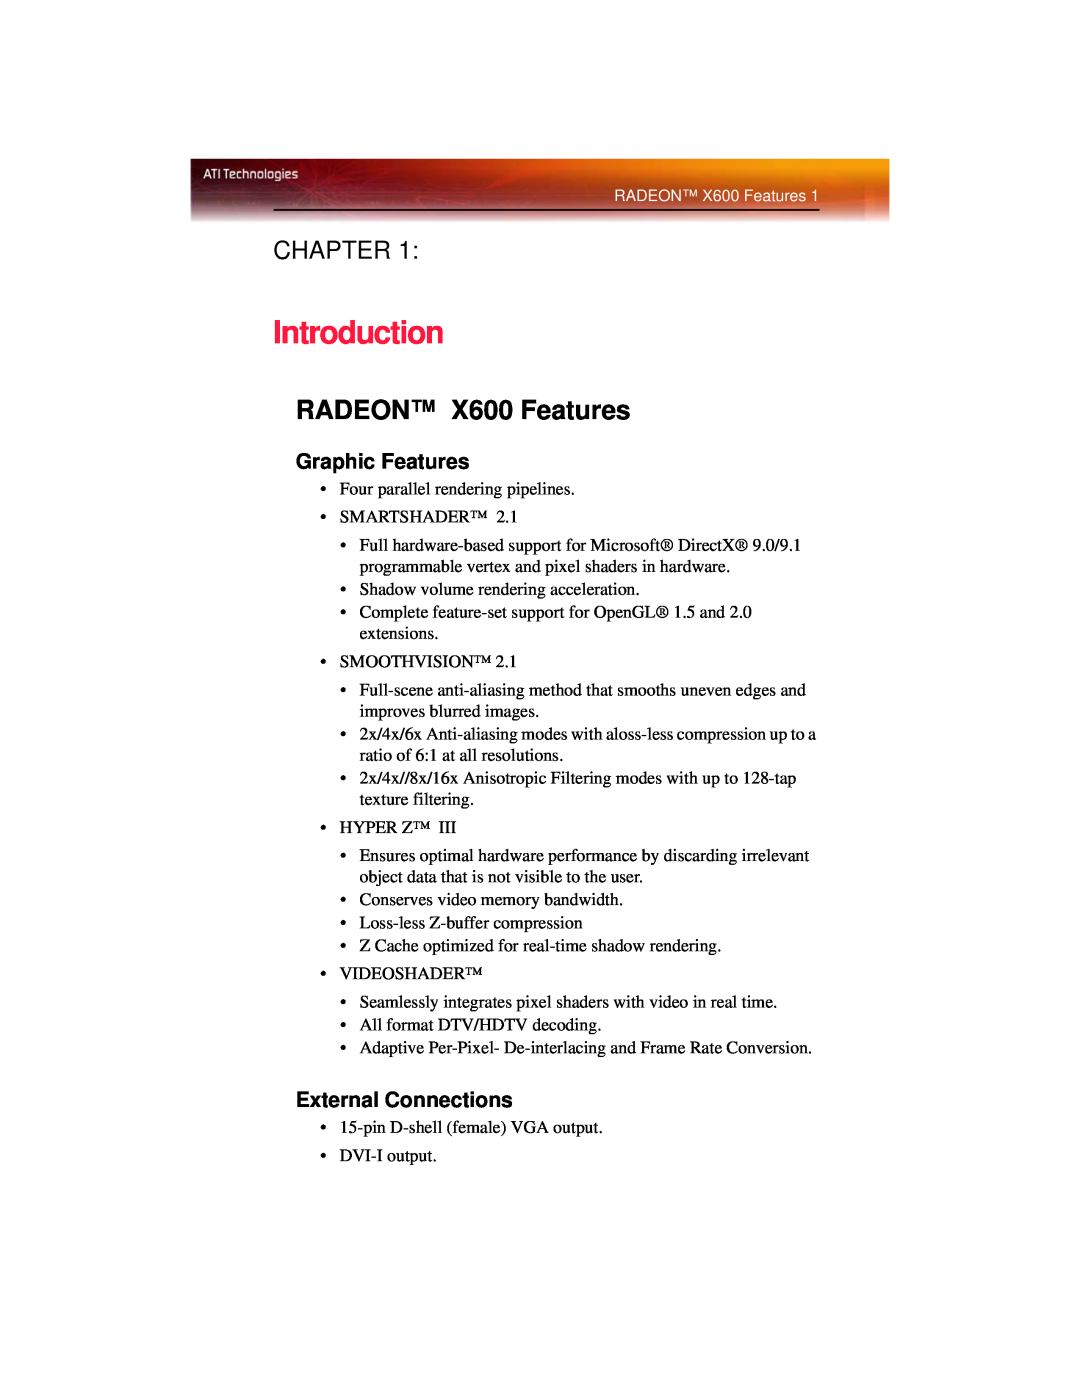 ATI Technologies manual Introduction, RADEON X600 Features, Chapter, Graphic Features, External Connections 